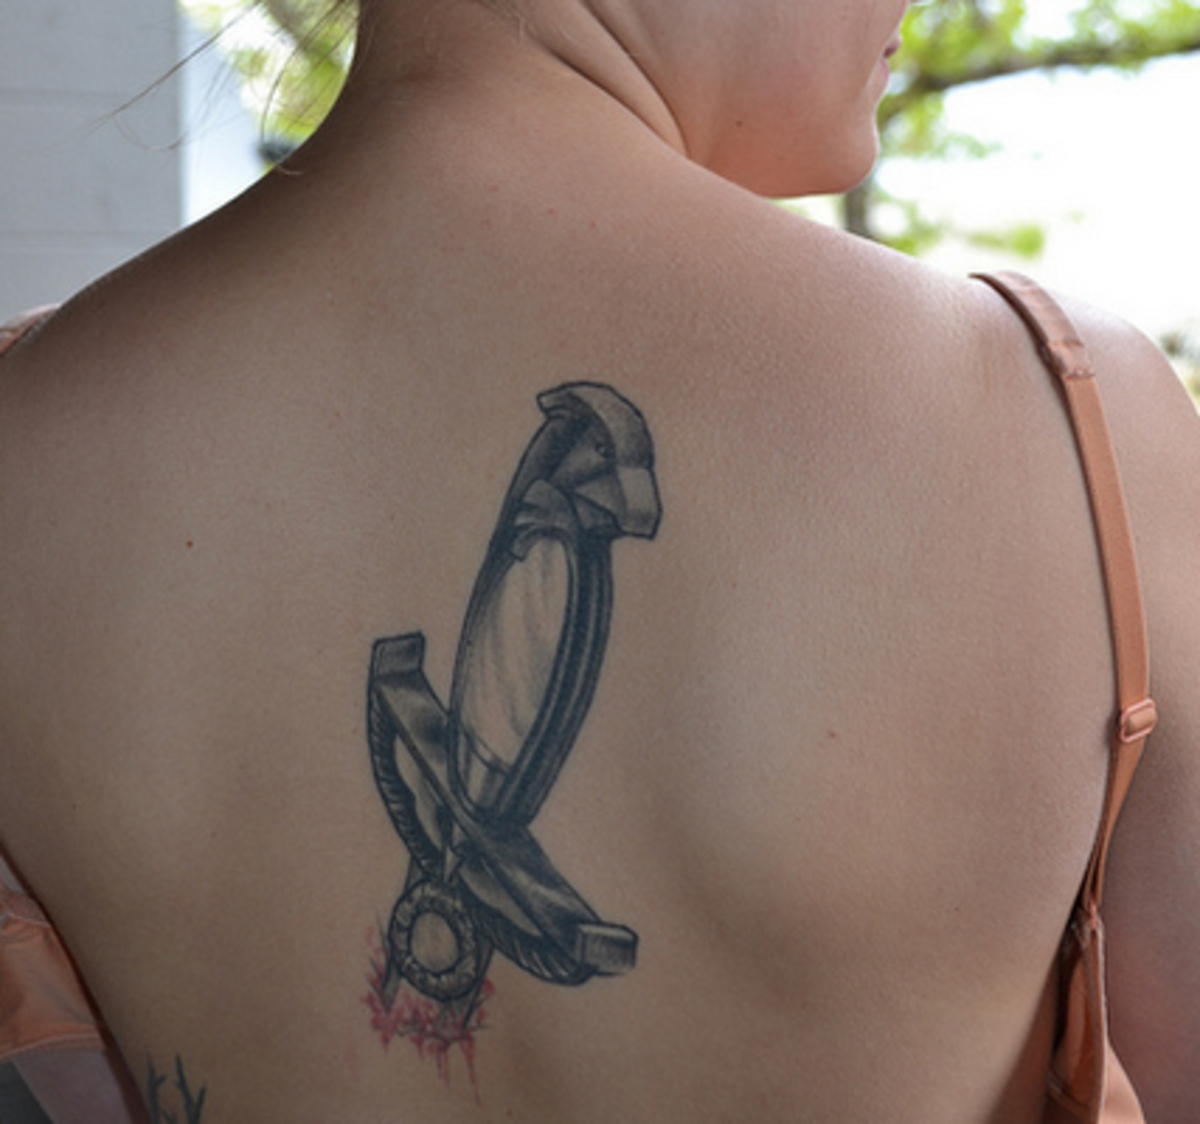 Dagger Tattoos Ideas, Designs, and Meanings TatRing